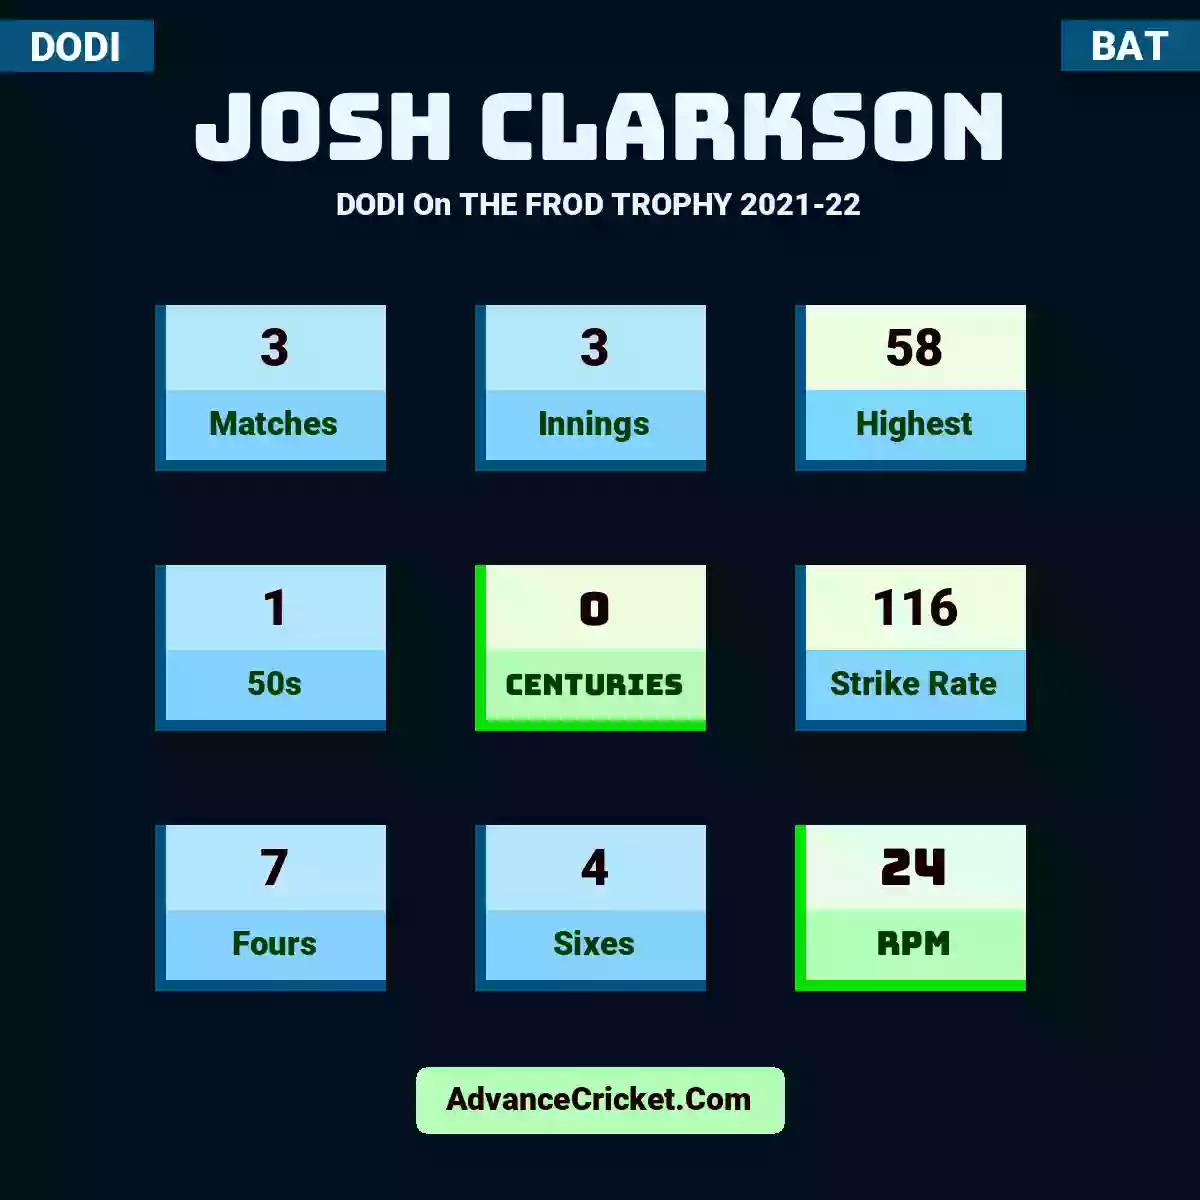 Josh Clarkson DODI  On THE FROD TROPHY 2021-22, Josh Clarkson played 3 matches, scored 58 runs as highest, 1 half-centuries, and 0 centuries, with a strike rate of 116. J.Clarkson hit 7 fours and 4 sixes, with an RPM of 24.